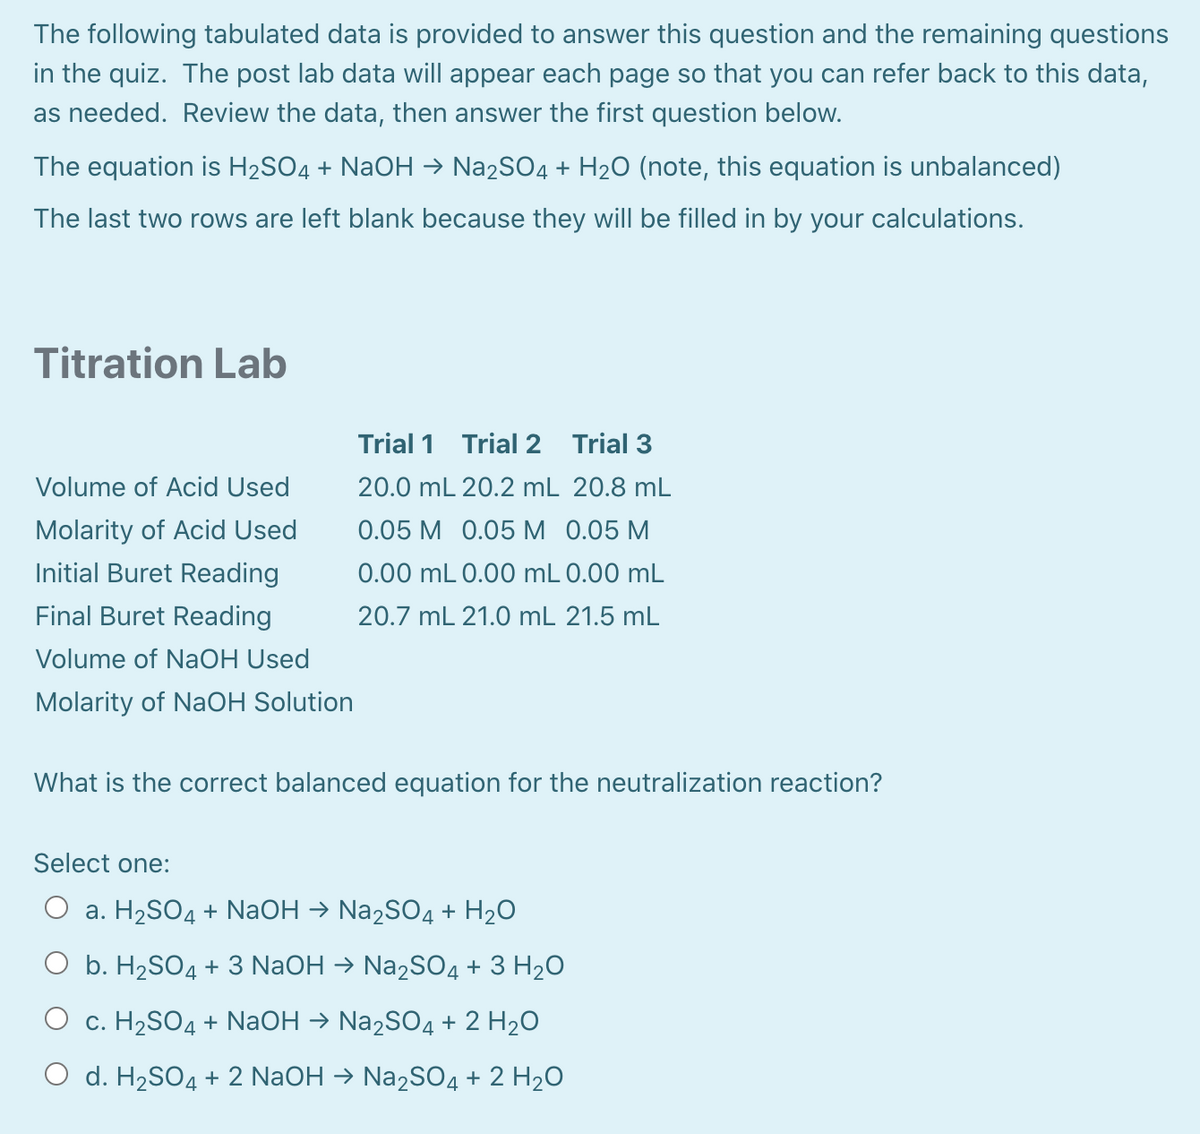 The following tabulated data is provided to answer this question and the remaining questions
in the quiz. The post lab data will appear each page so that you can refer back to this data,
as needed. Review the data, then answer the first question below.
The equation is H2SO4 + NaOH → Na2SO4 + H20 (note, this equation is unbalanced)
The last two rows are left blank because they will be filled in by your calculations.
Titration Lab
Trial 1 Trial 2 Trial 3
Volume of Acid Used
20.0 mL 20.2 mL 20.8 mL
Molarity of Acid Used
0.05 M 0.05 M 0.05 M
Initial Buret Reading
0.00 mL 0.00 mL 0.00 mL
Final Buret Reading
20.7 mL 21.0 mL 21.5 mL
Volume of NaOH Used
Molarity of NaOH Solution
What is the correct balanced equation for the neutralization reaction?
Select one:
O a. H2SO4 + NaOH → Na2SO4 + H2O
O b. H2SO4 + 3 NaOH → Na2SO4 + 3 H2O
c. H2SO4 + NaOH → Na2SO4 + 2 H20
O d. H2SO4 + 2 N2OH → N22SO4 + 2 H2O
